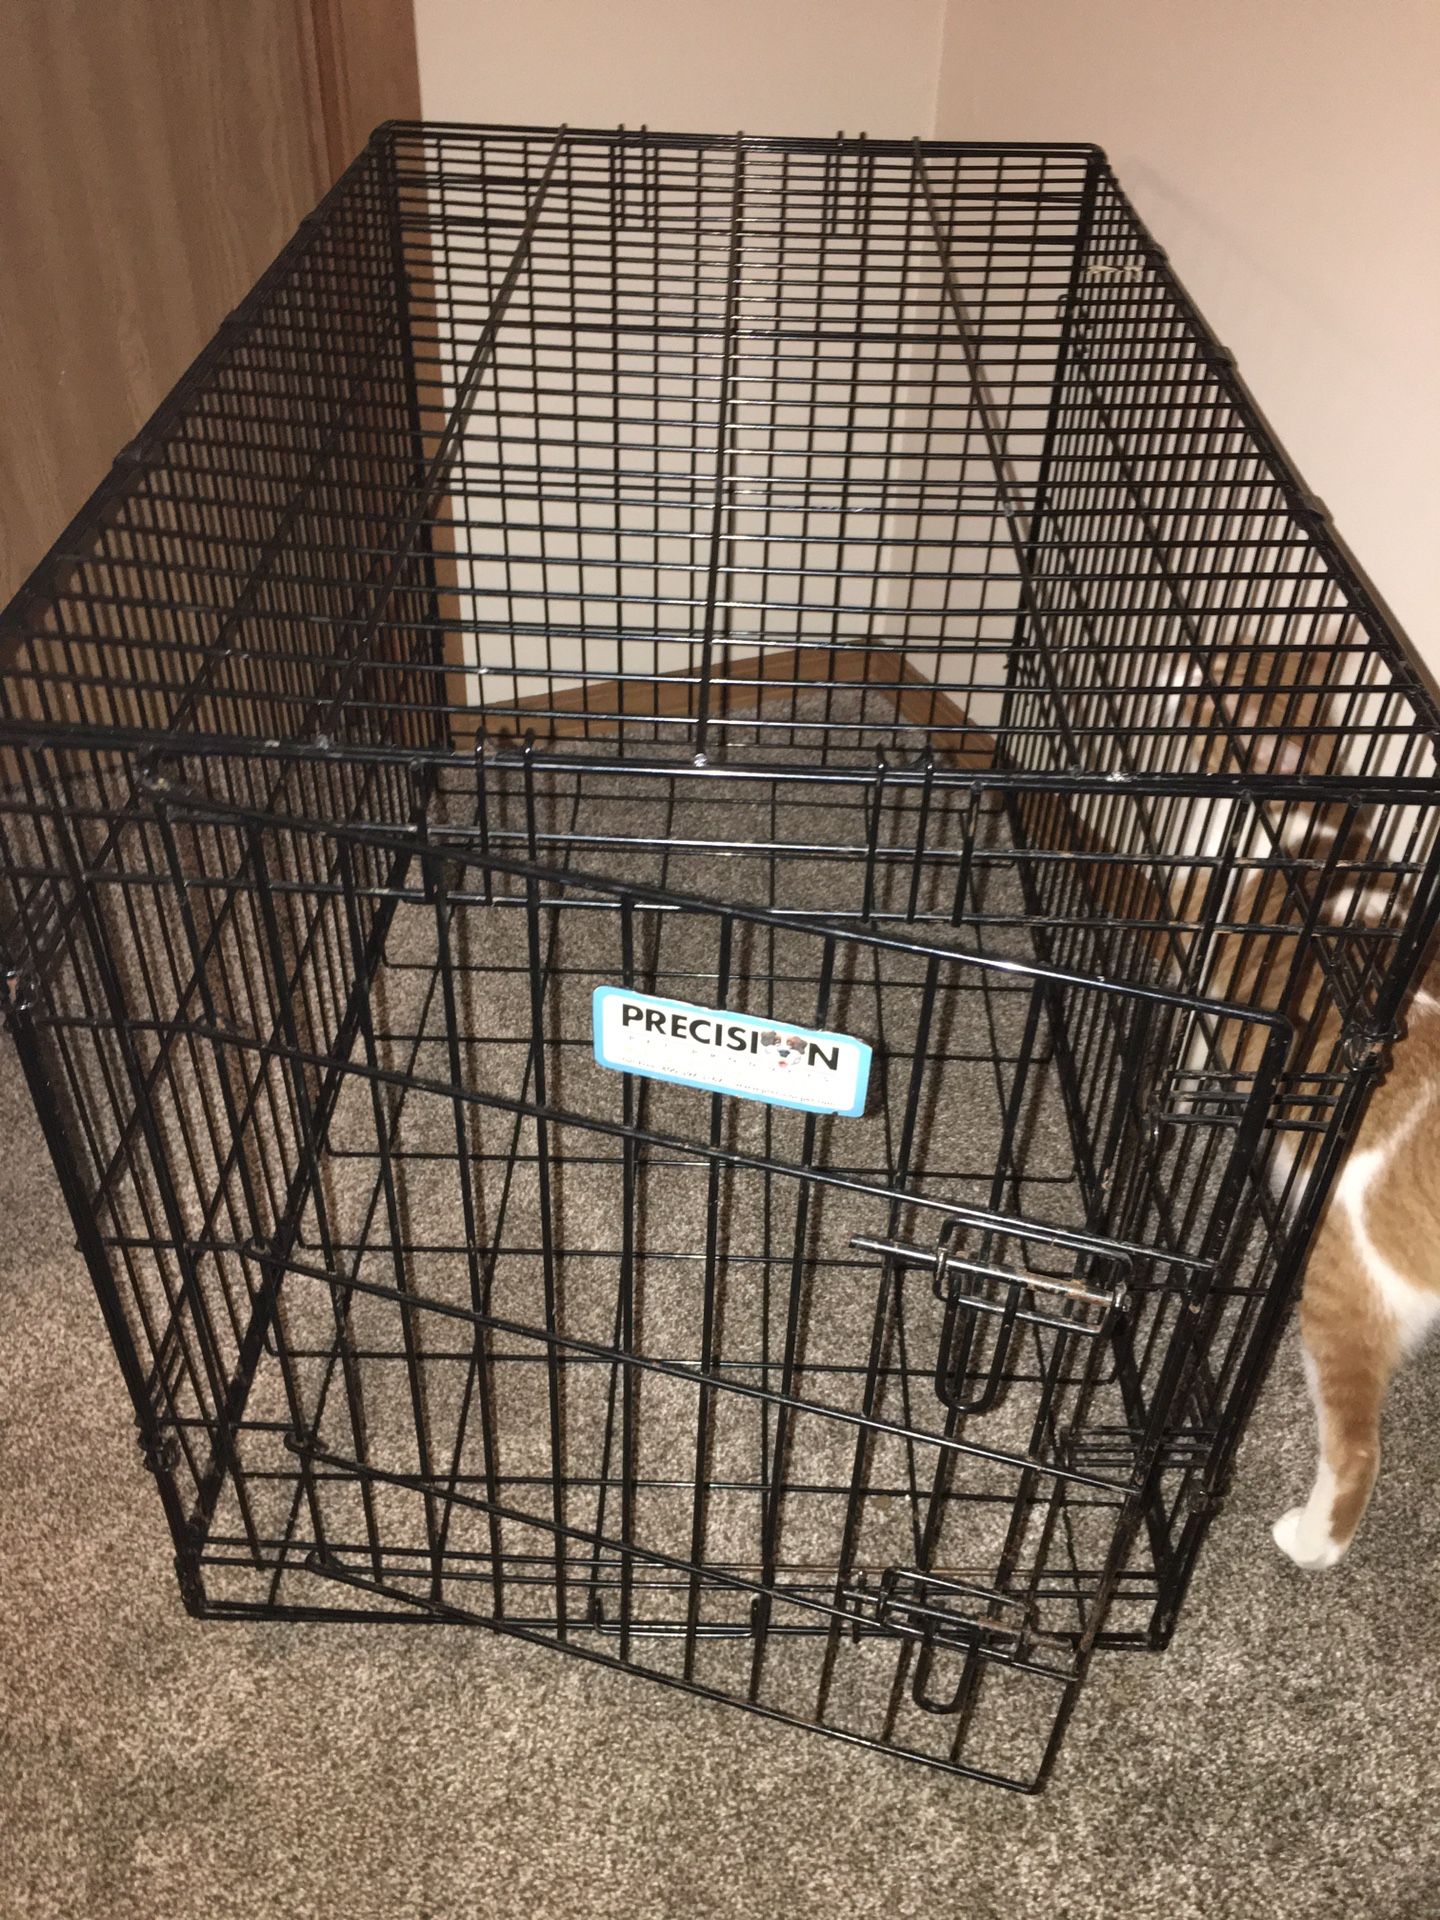 Precision Dog Crate 3 ft long, little under 2ft tall.